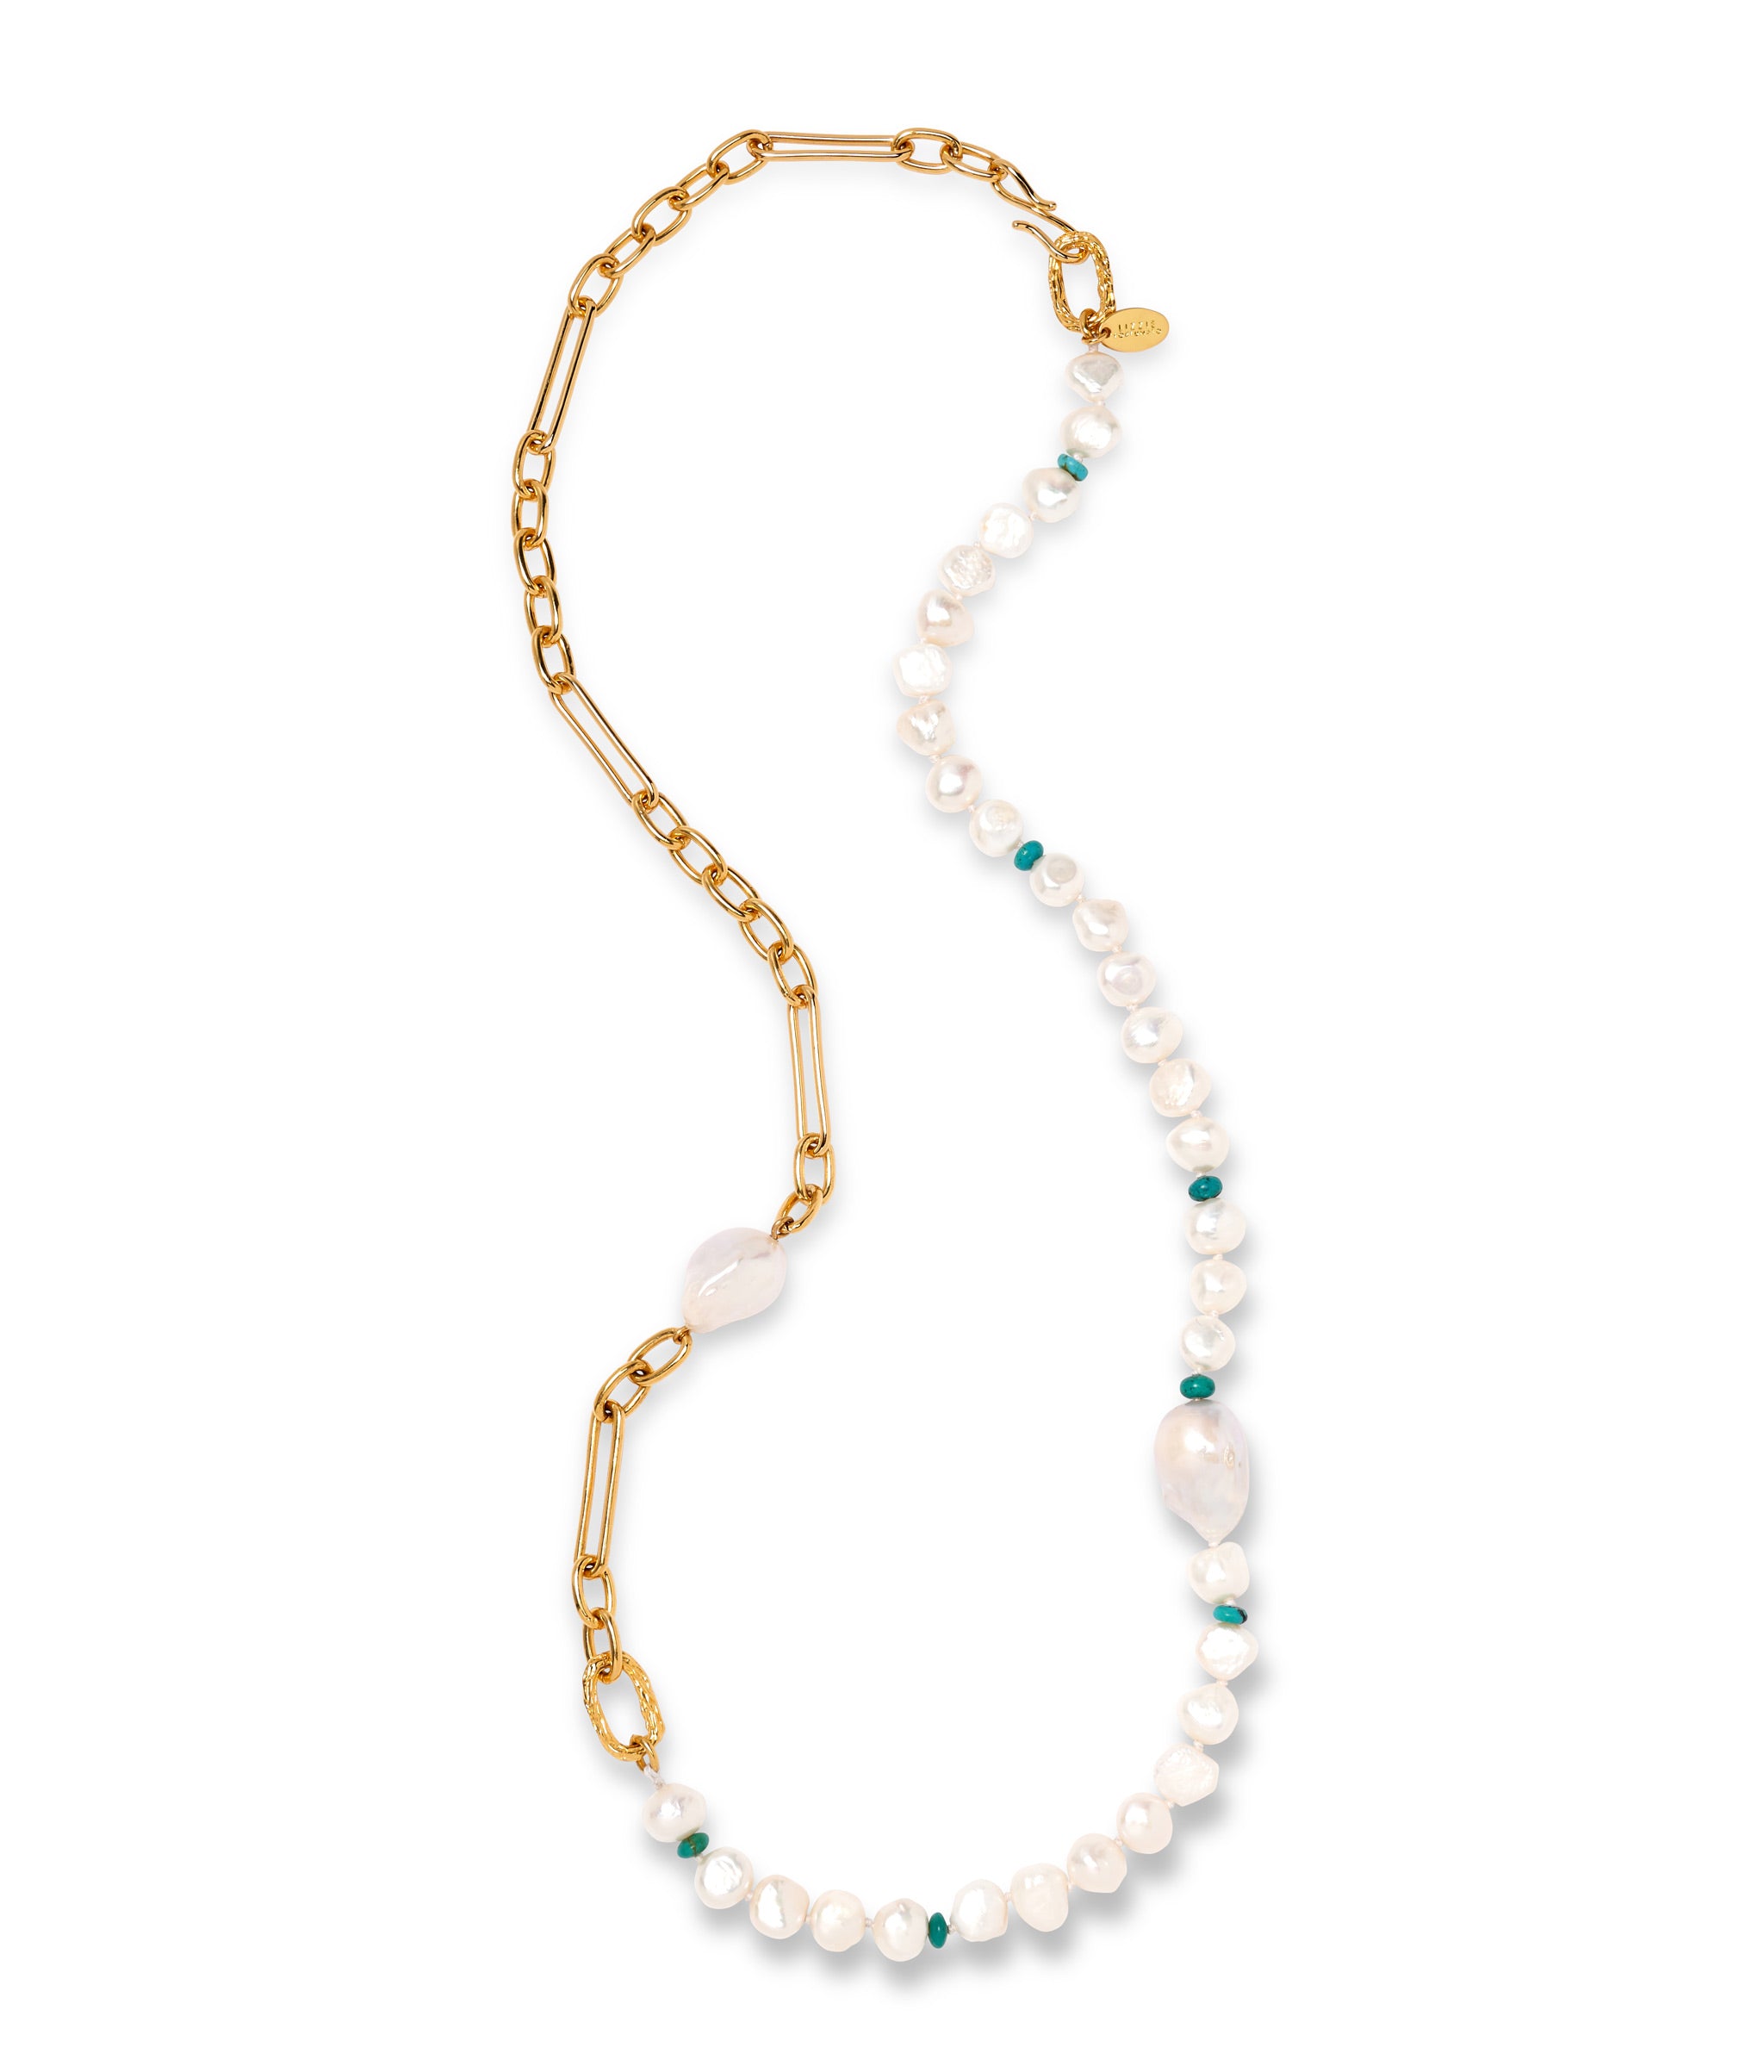 Long gold-plated brass linked chain, knotted freshwater pearls and turquoise bead.